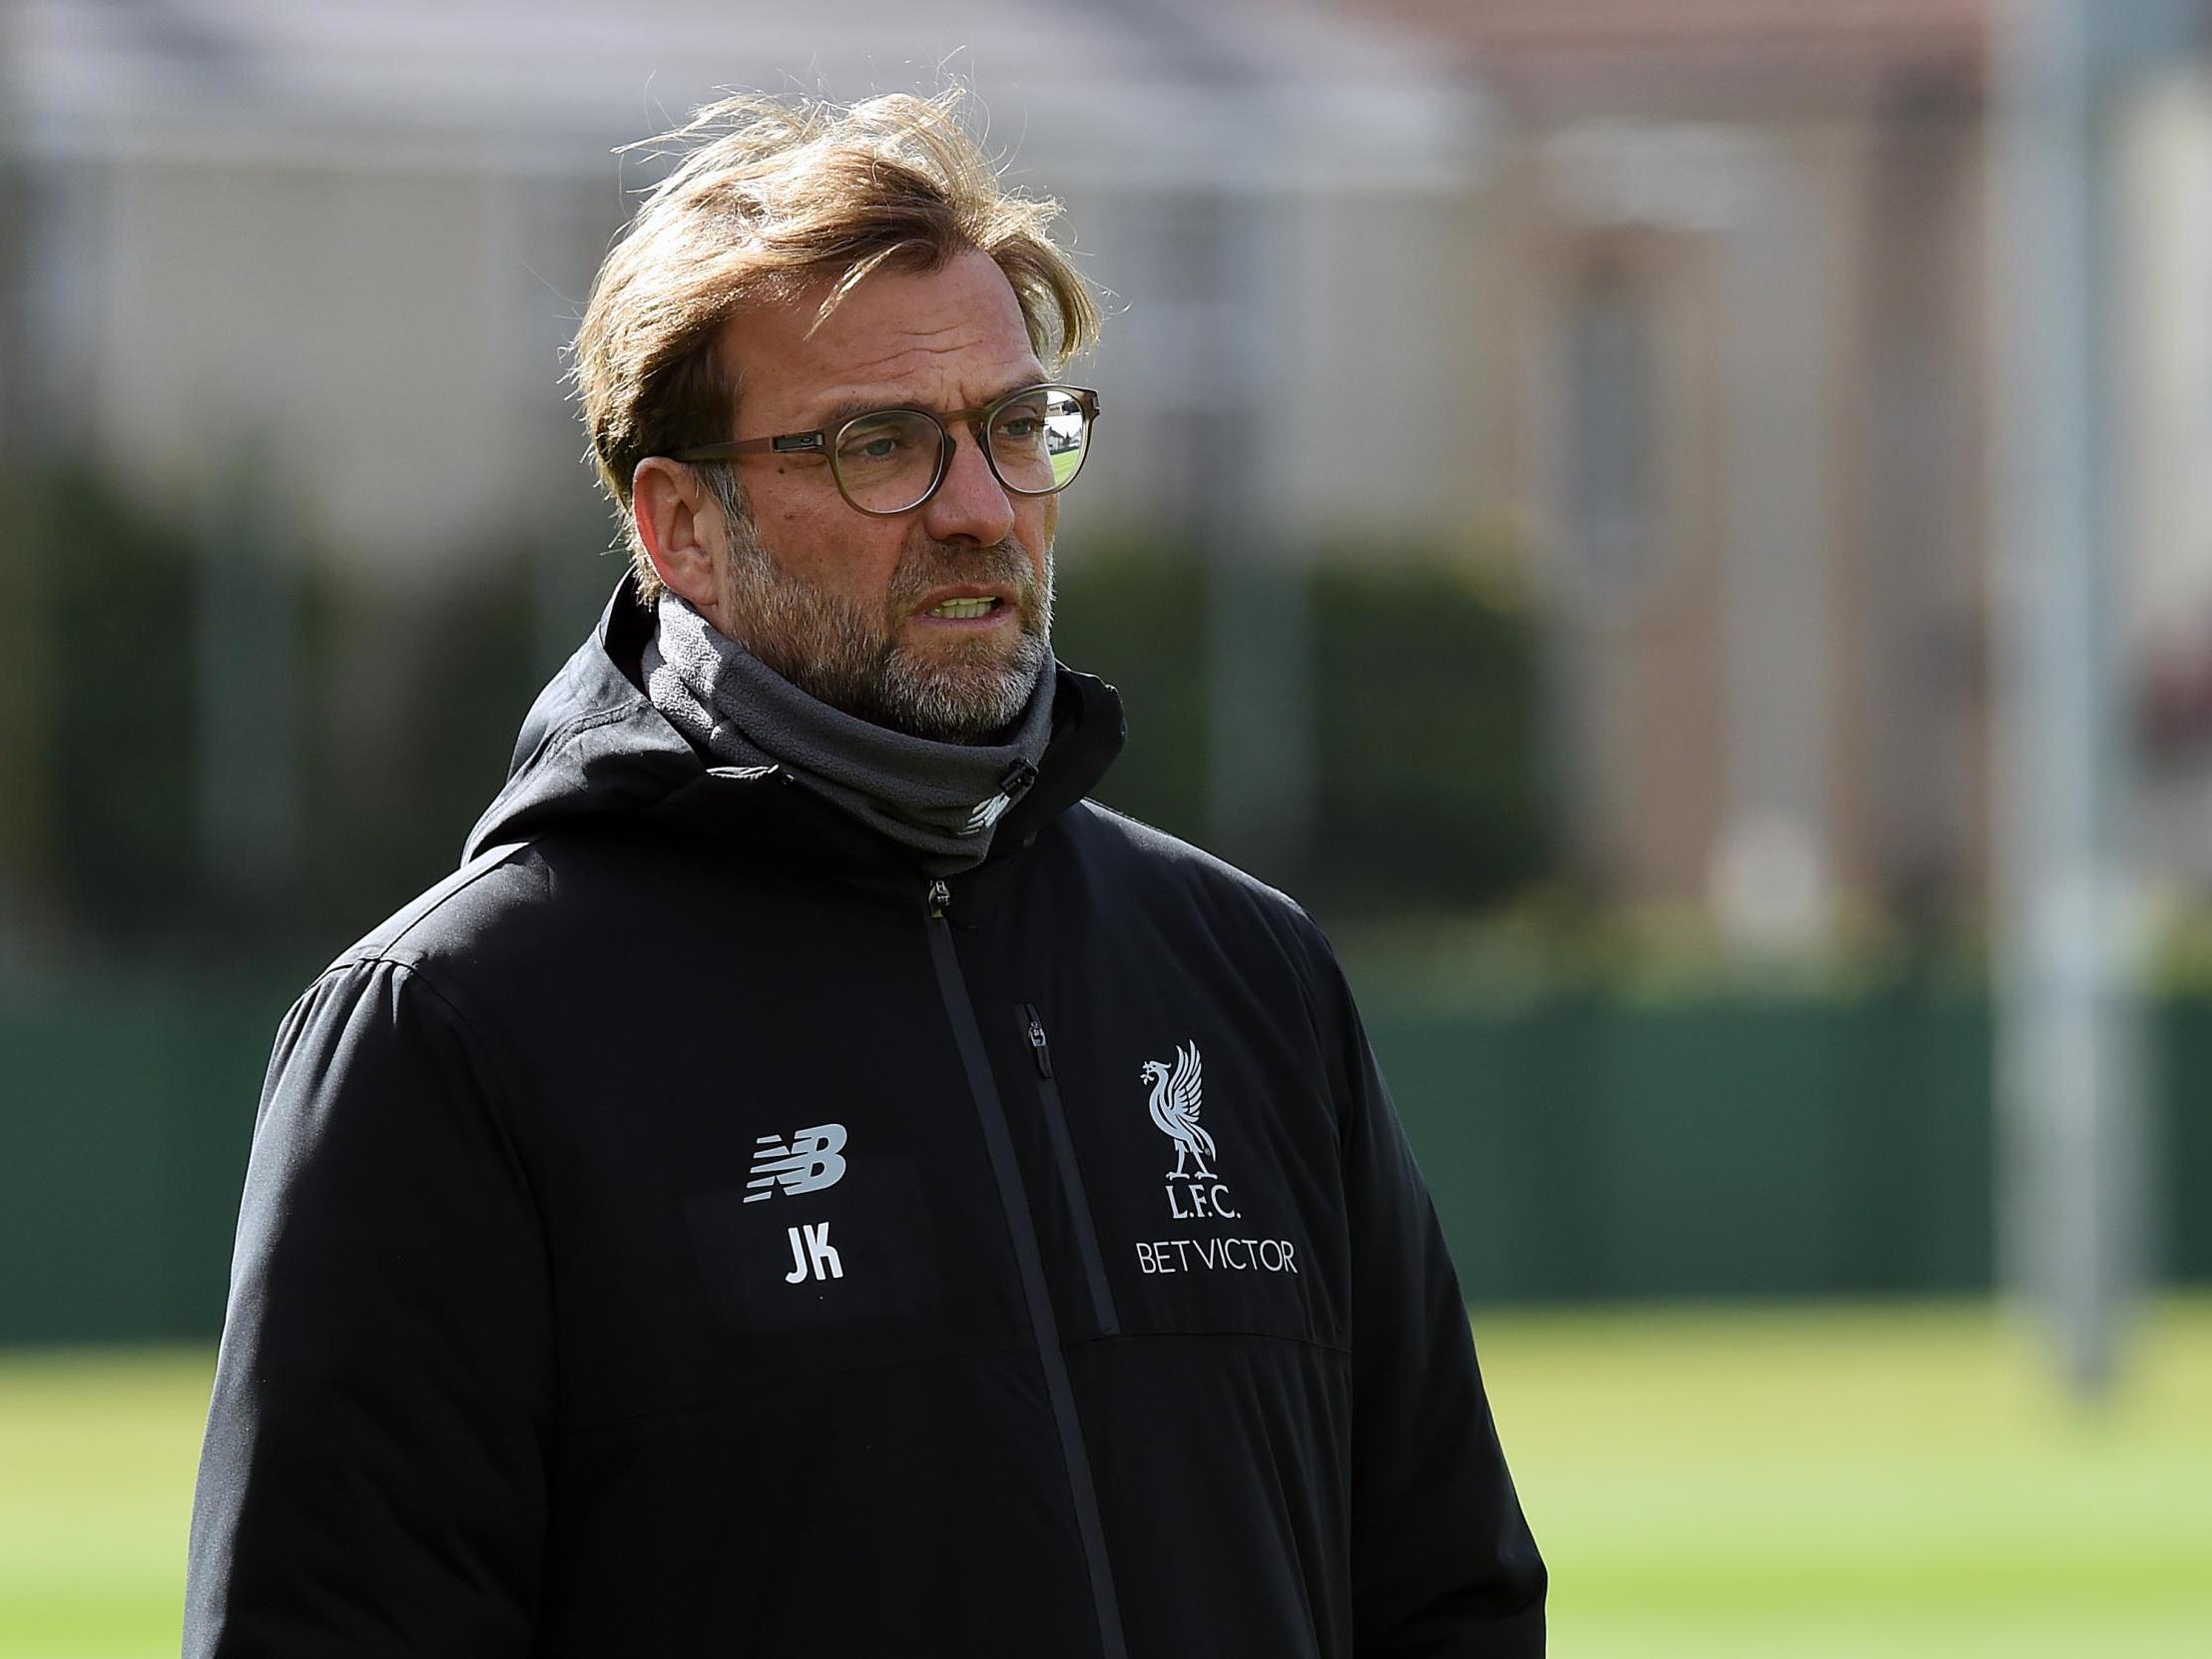 Liverpool vs Chelsea: Jurgen Klopp calls on Reds to be in 'real fighting mood' for title race 'sprint'